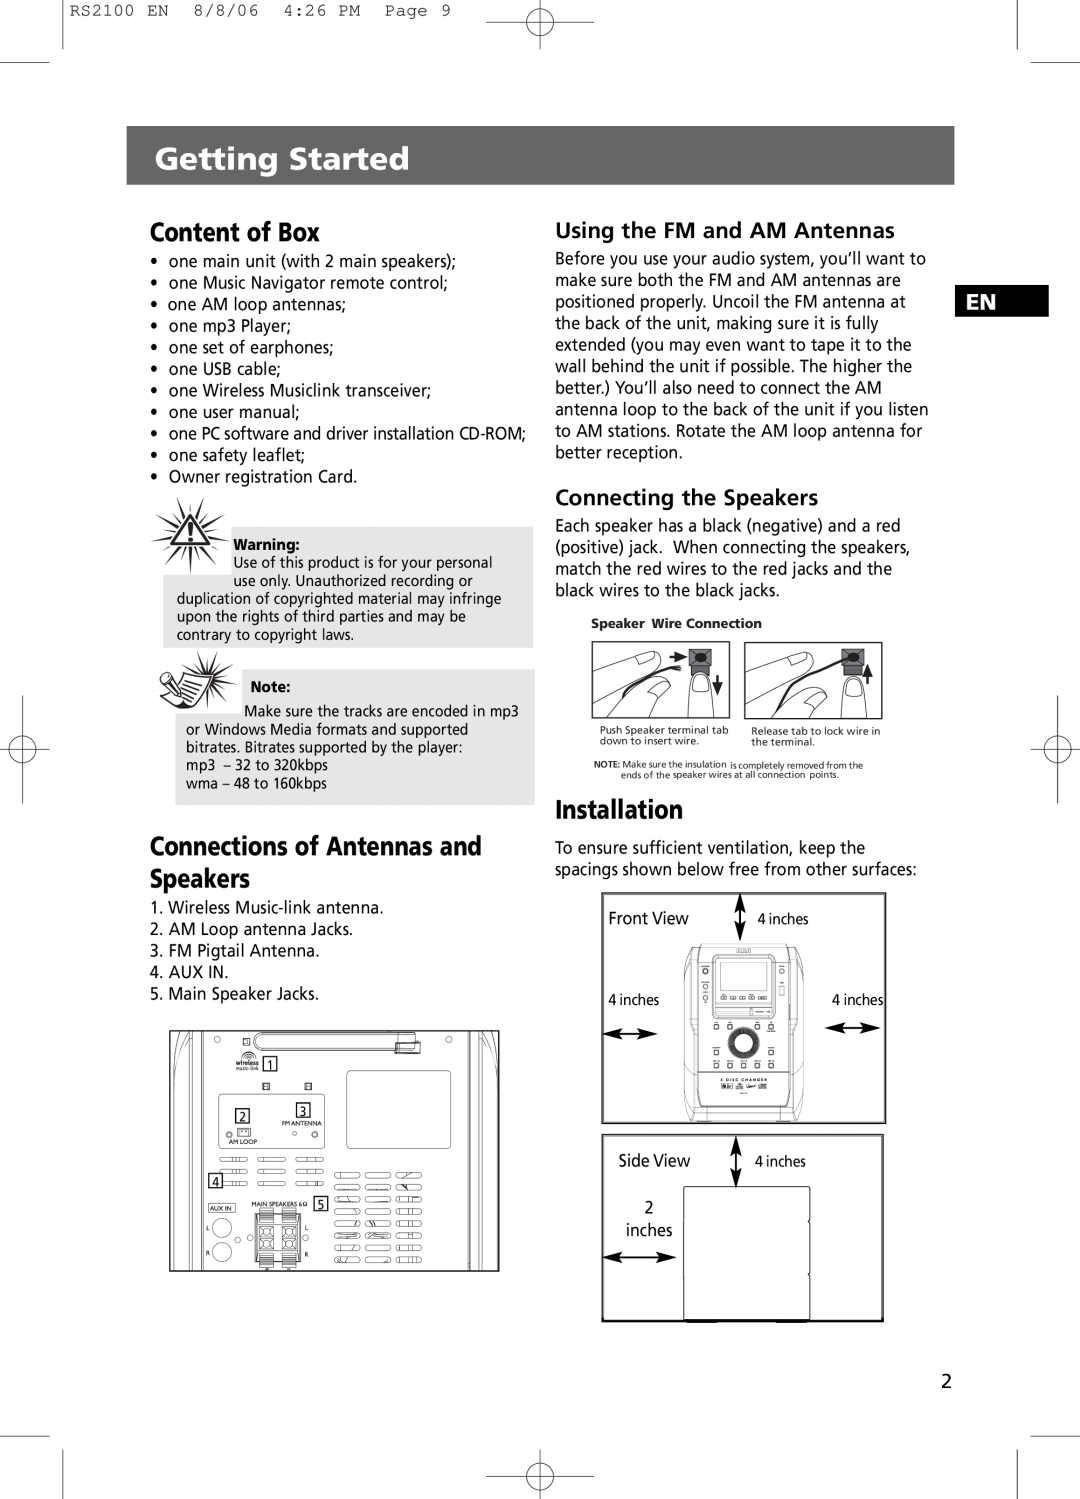 RCA RS2100 user manual Getting Started, Content of Box, Connections of Antennas and Speakers, Installation 